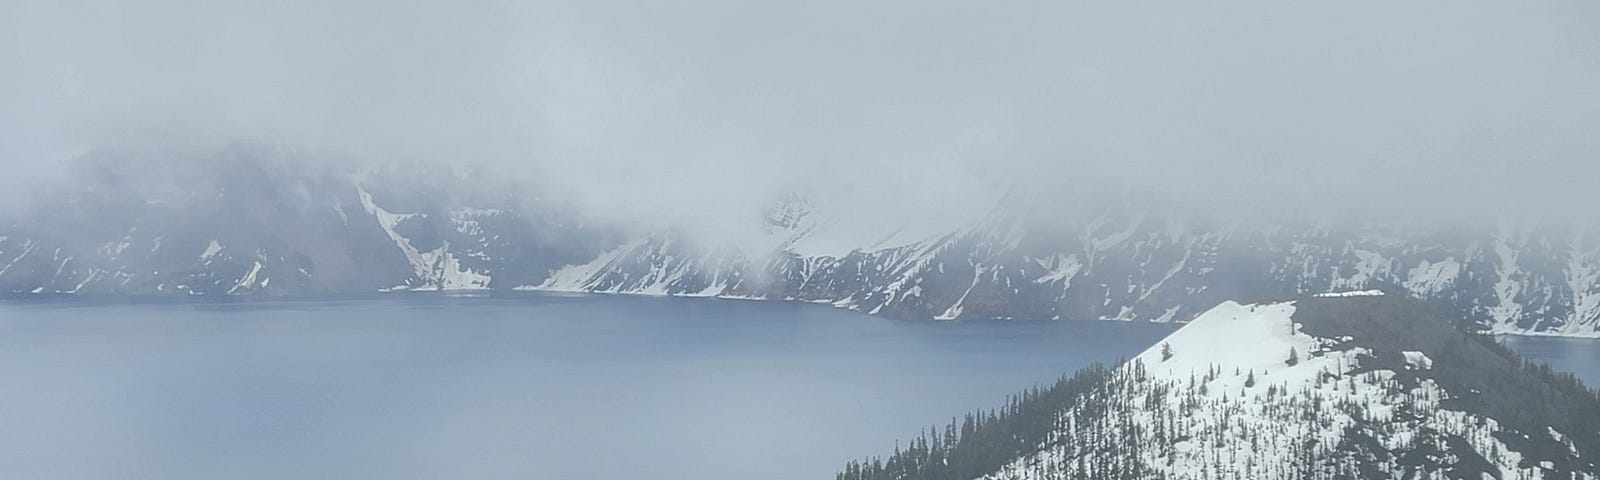 Dramatic photo of an island in the midst of crater lake. The other shoreline is heavily shrouded in fog.